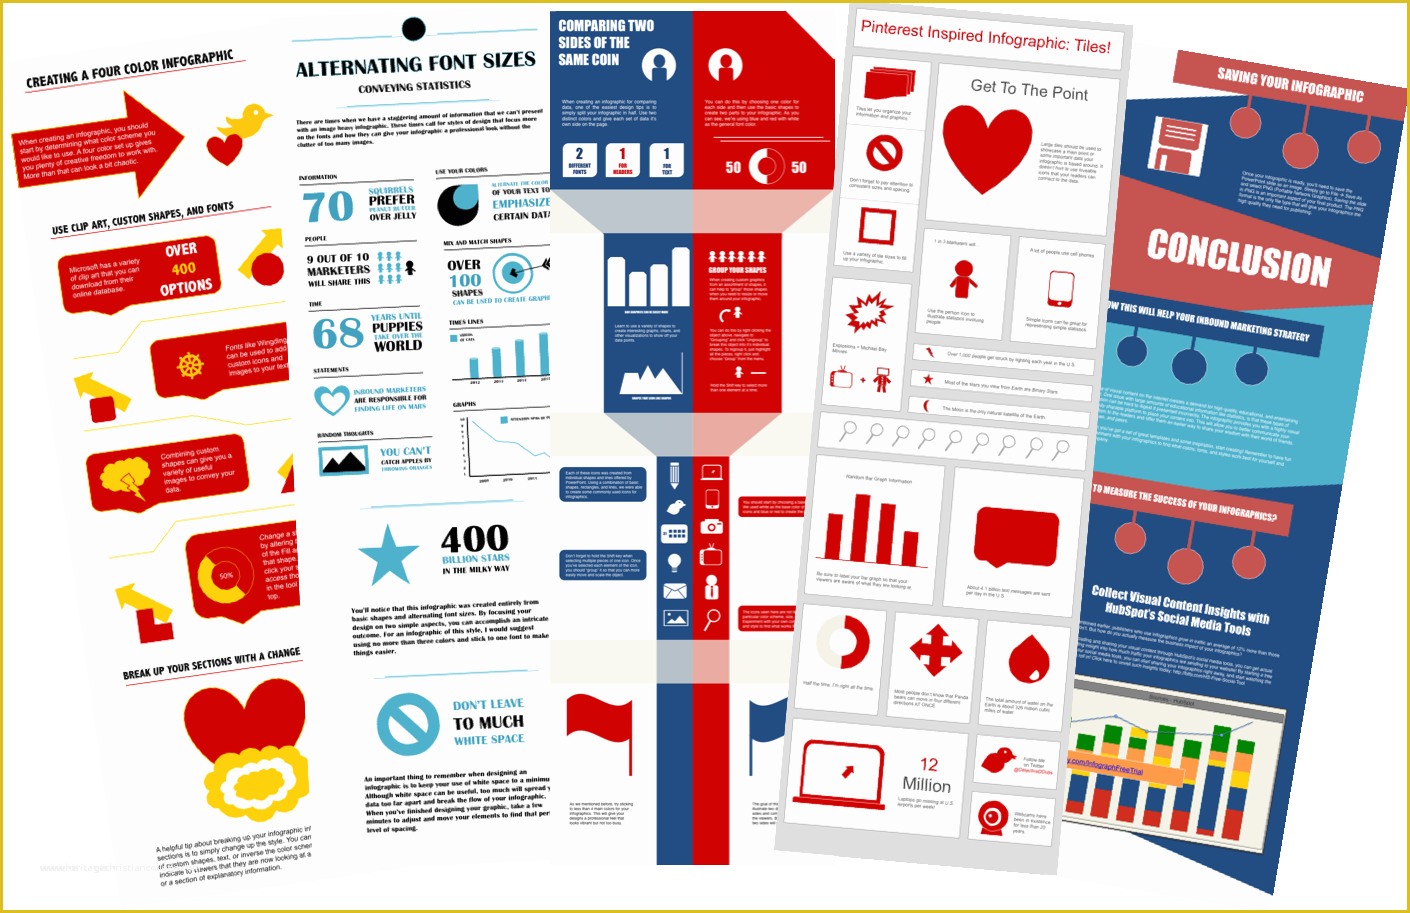 Free Hubspot Templates Of How to Create An Infographic In Under An Hour [10 Free